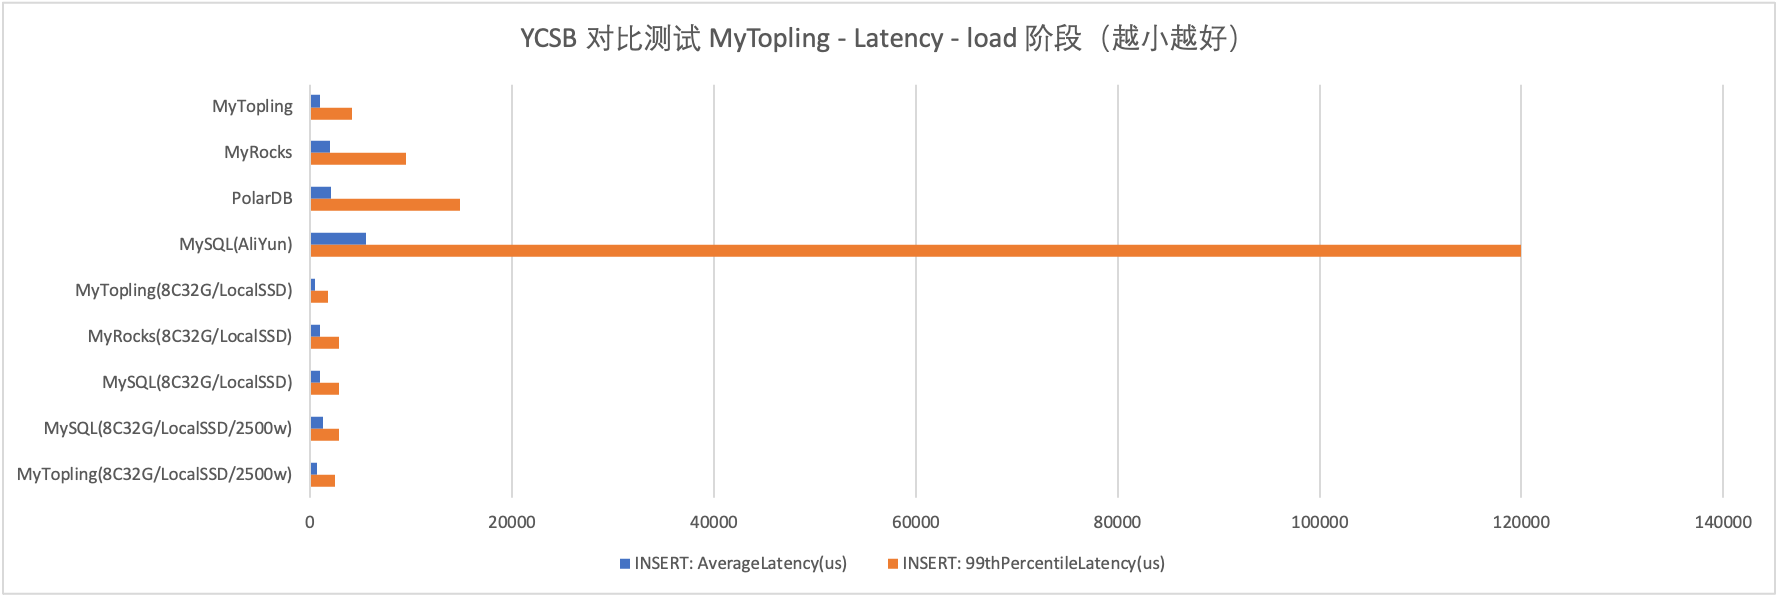 ycsb-all-latency-load